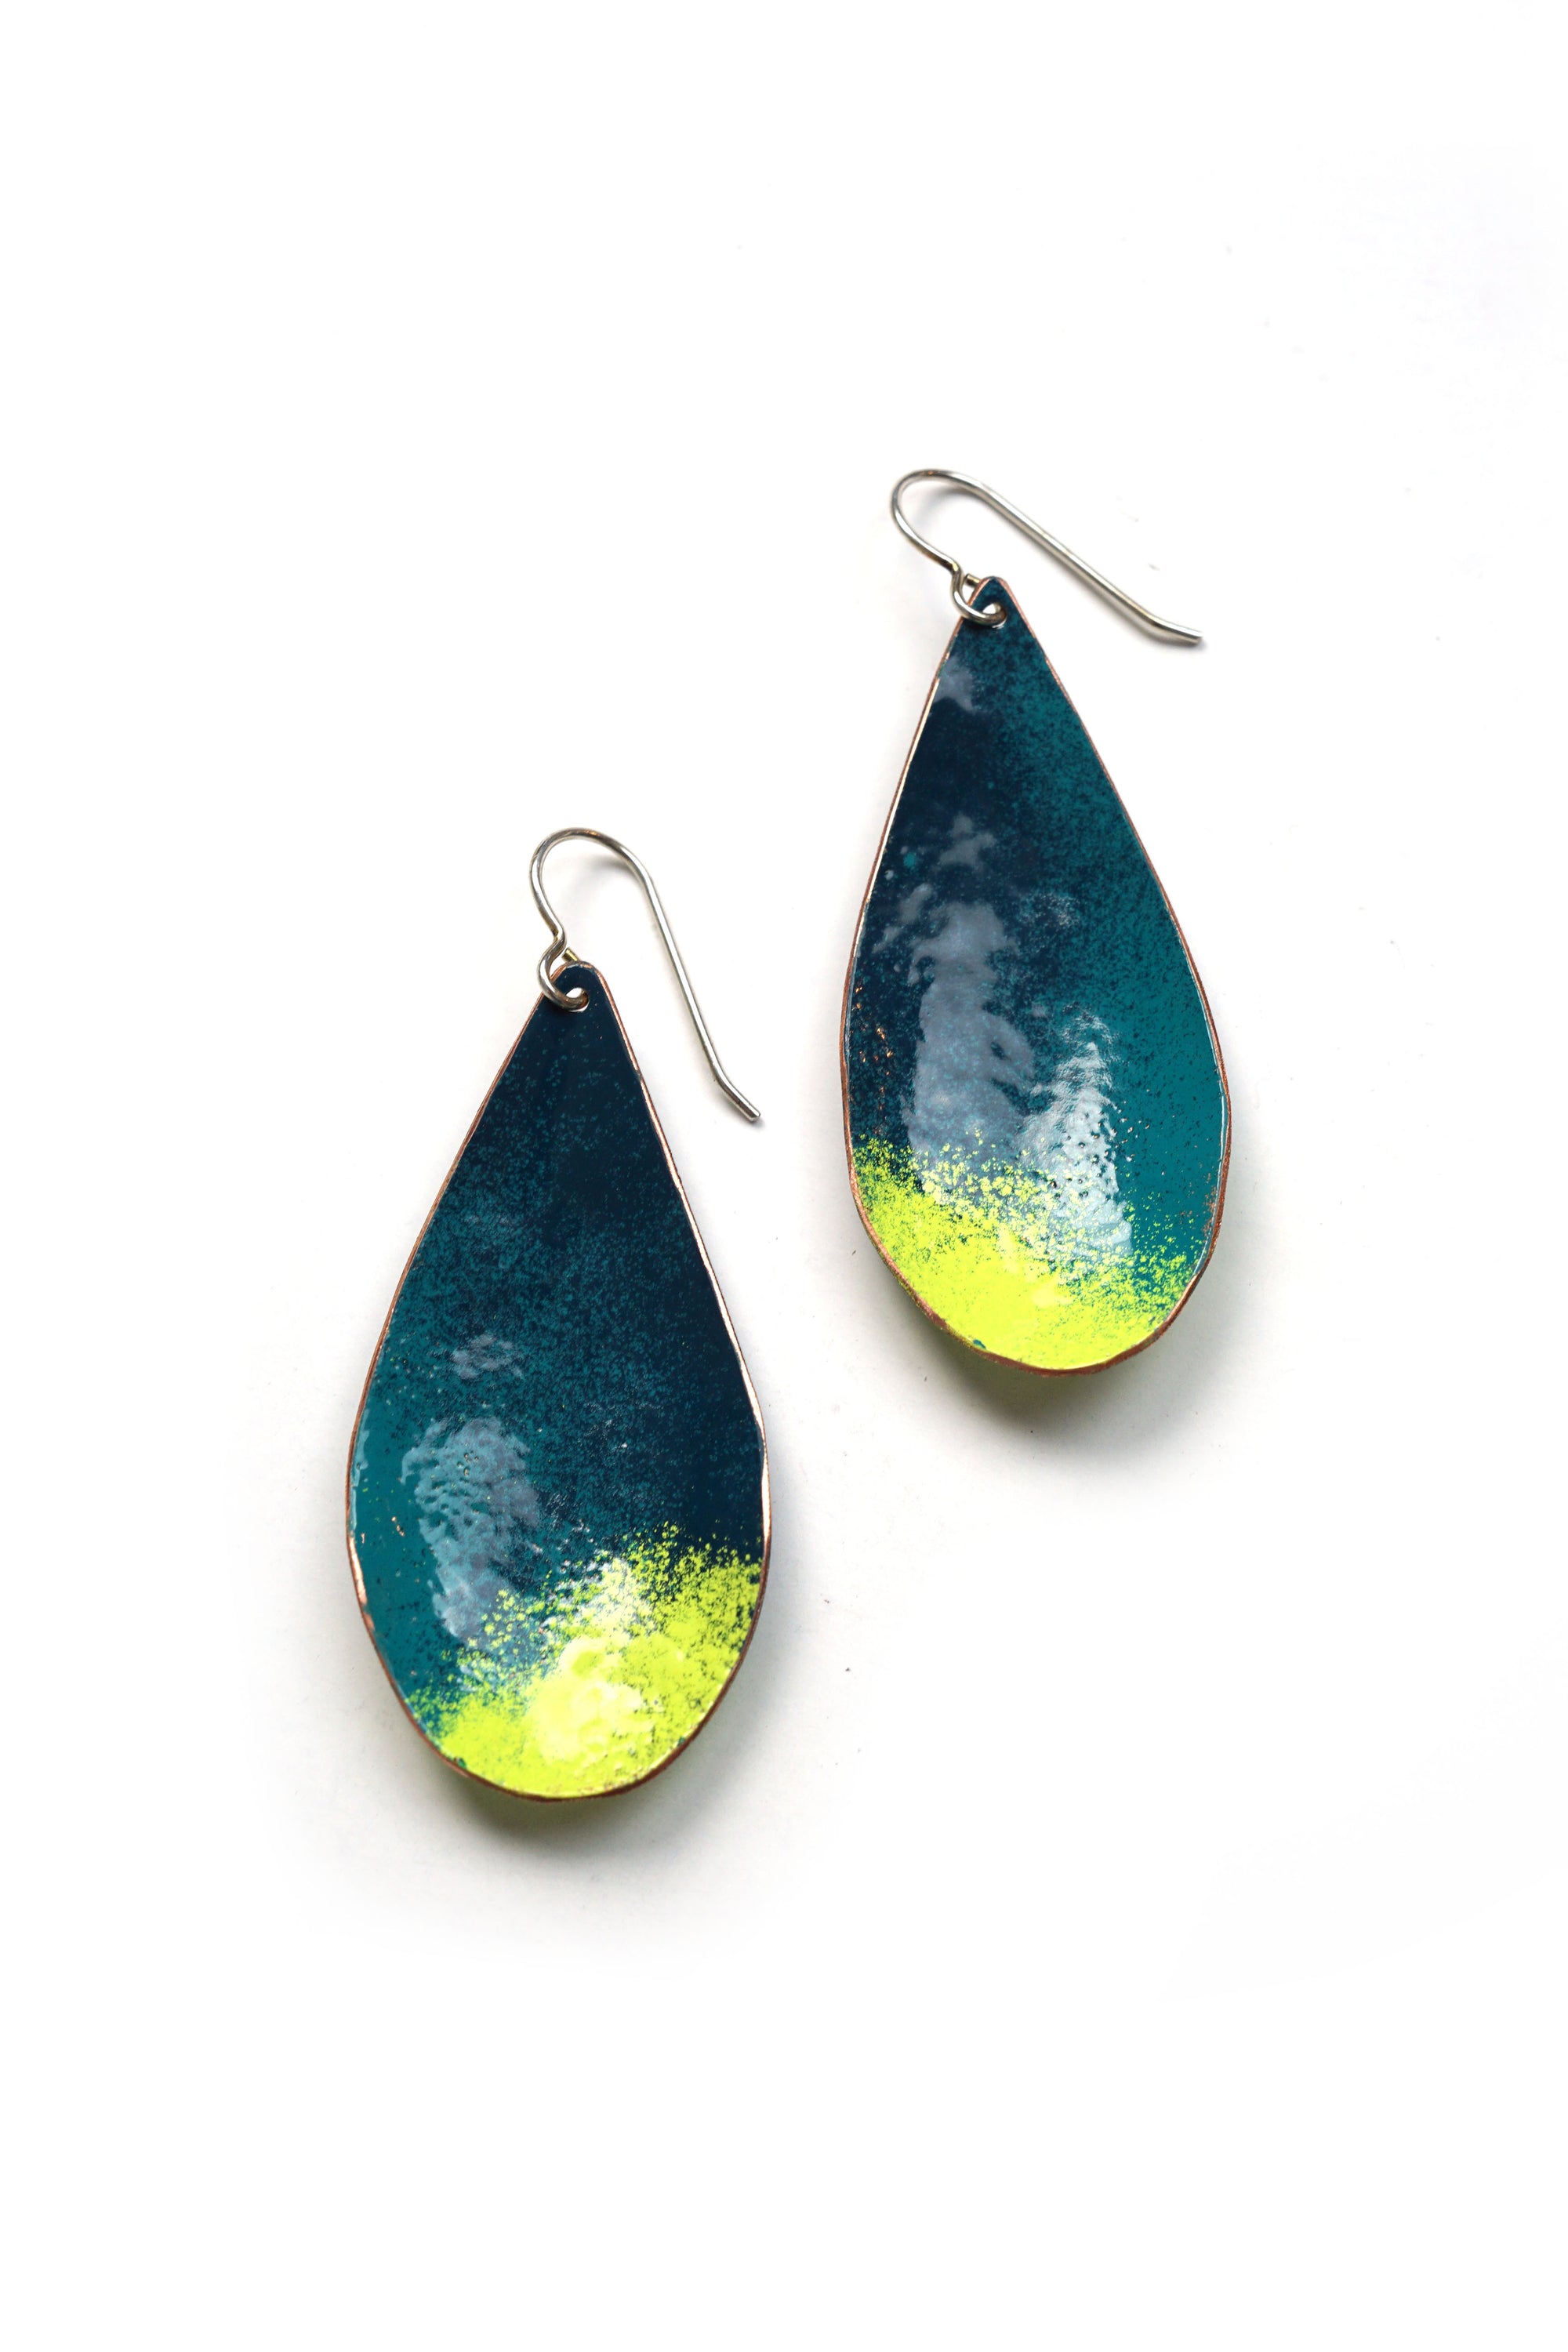 Chroma Earrings in Bold Teal and Neon Chartreuse